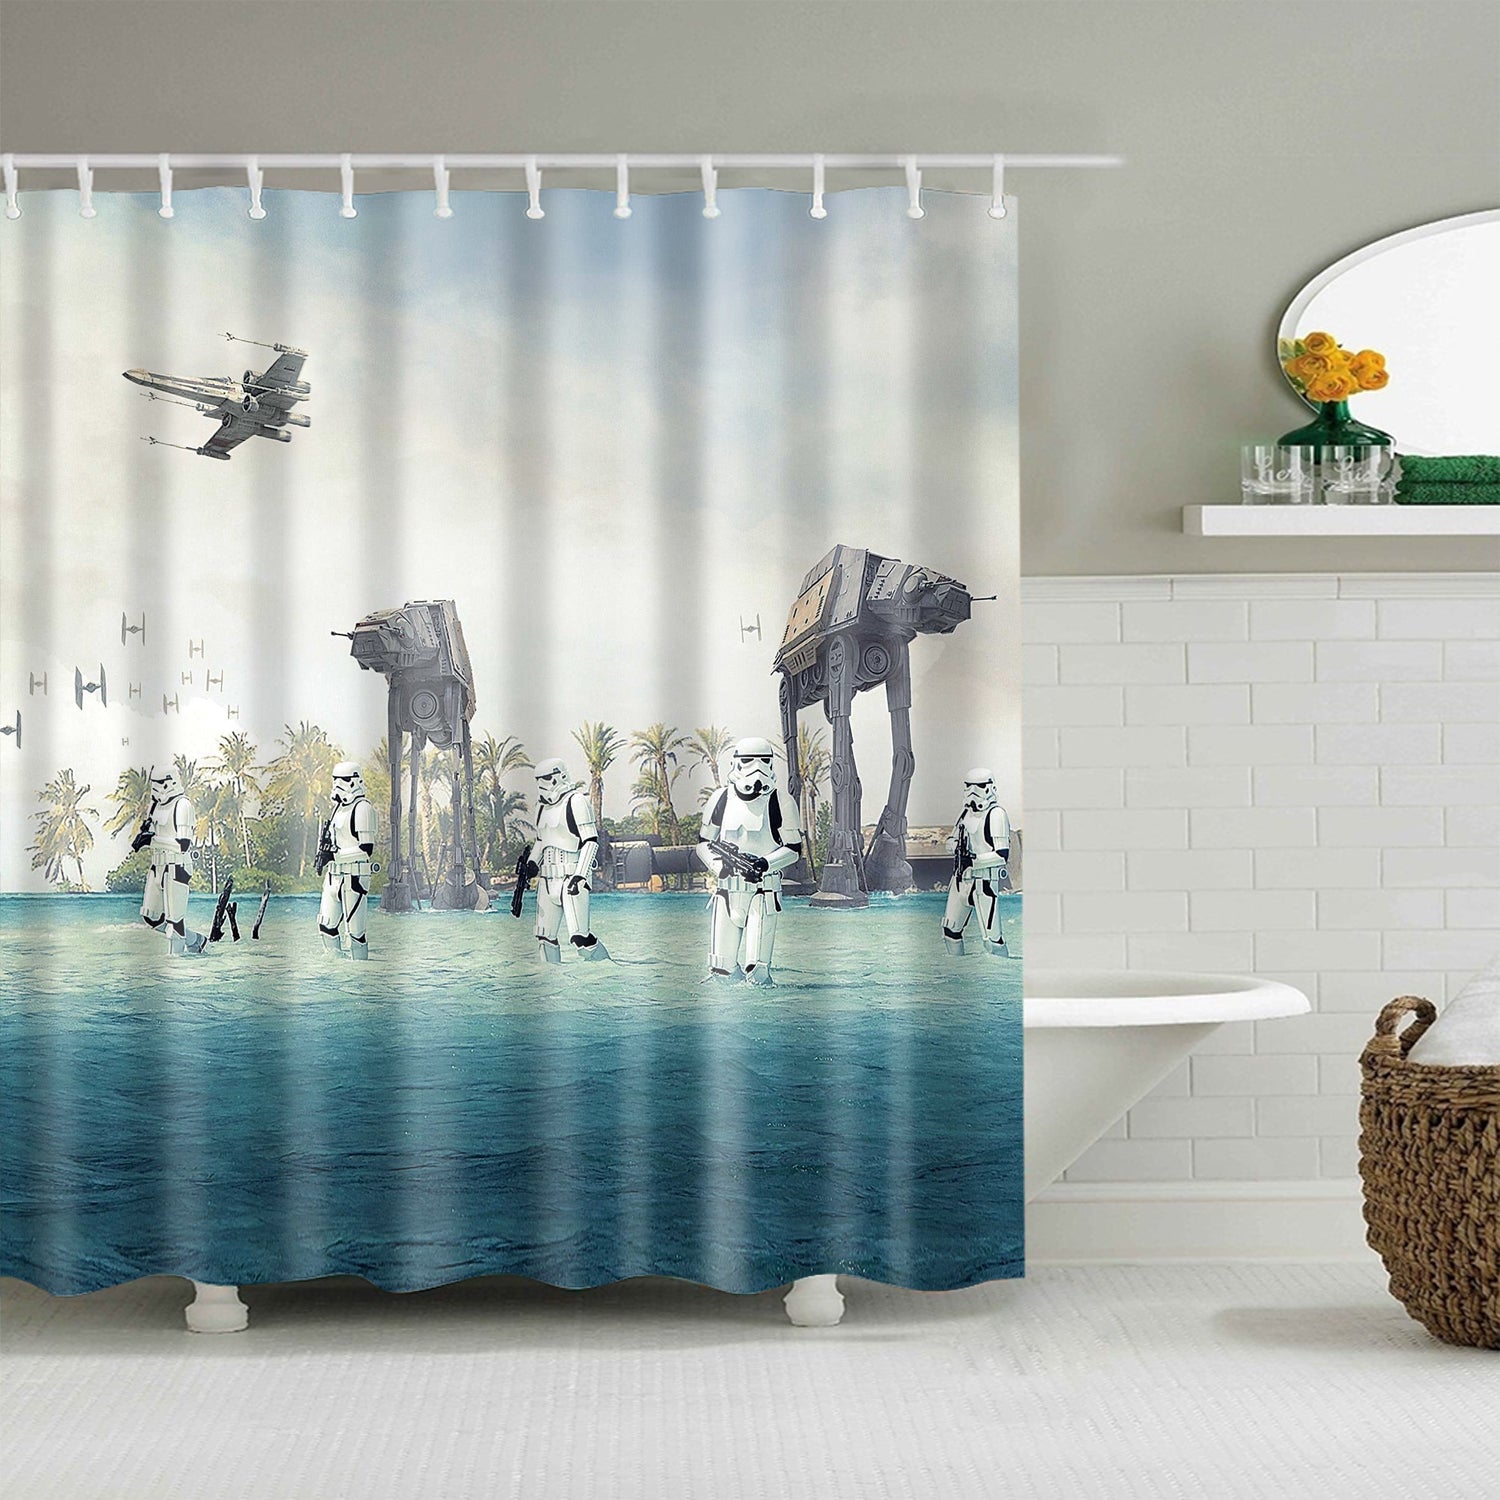 star wars shower curtain - Amazing Small Living Room Ideas (Photos) Home